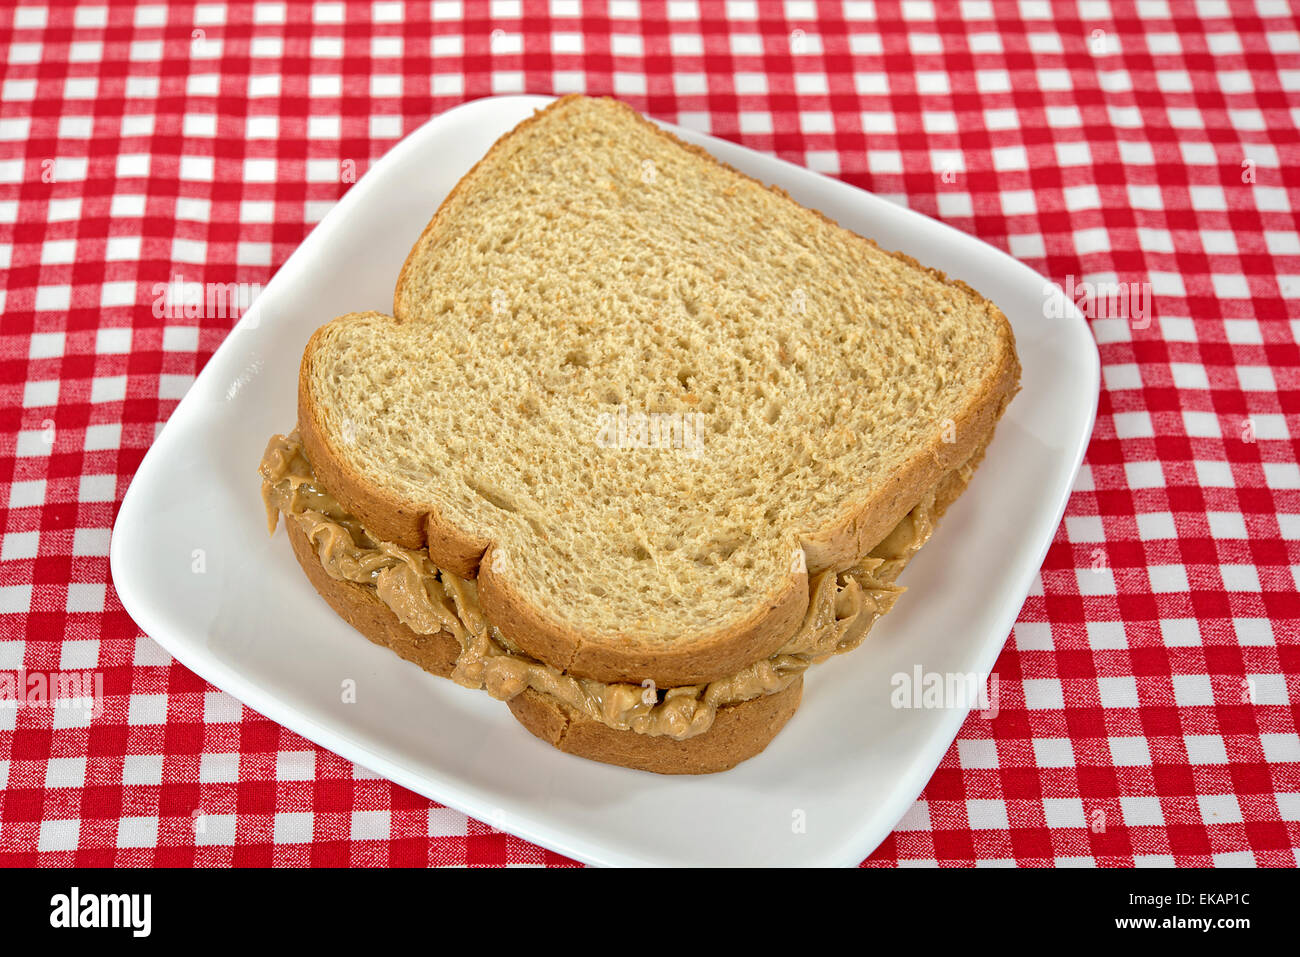 Peanut Butter Sandwich On Whole Wheat Bread On A Square White Plate Stock Photo Alamy